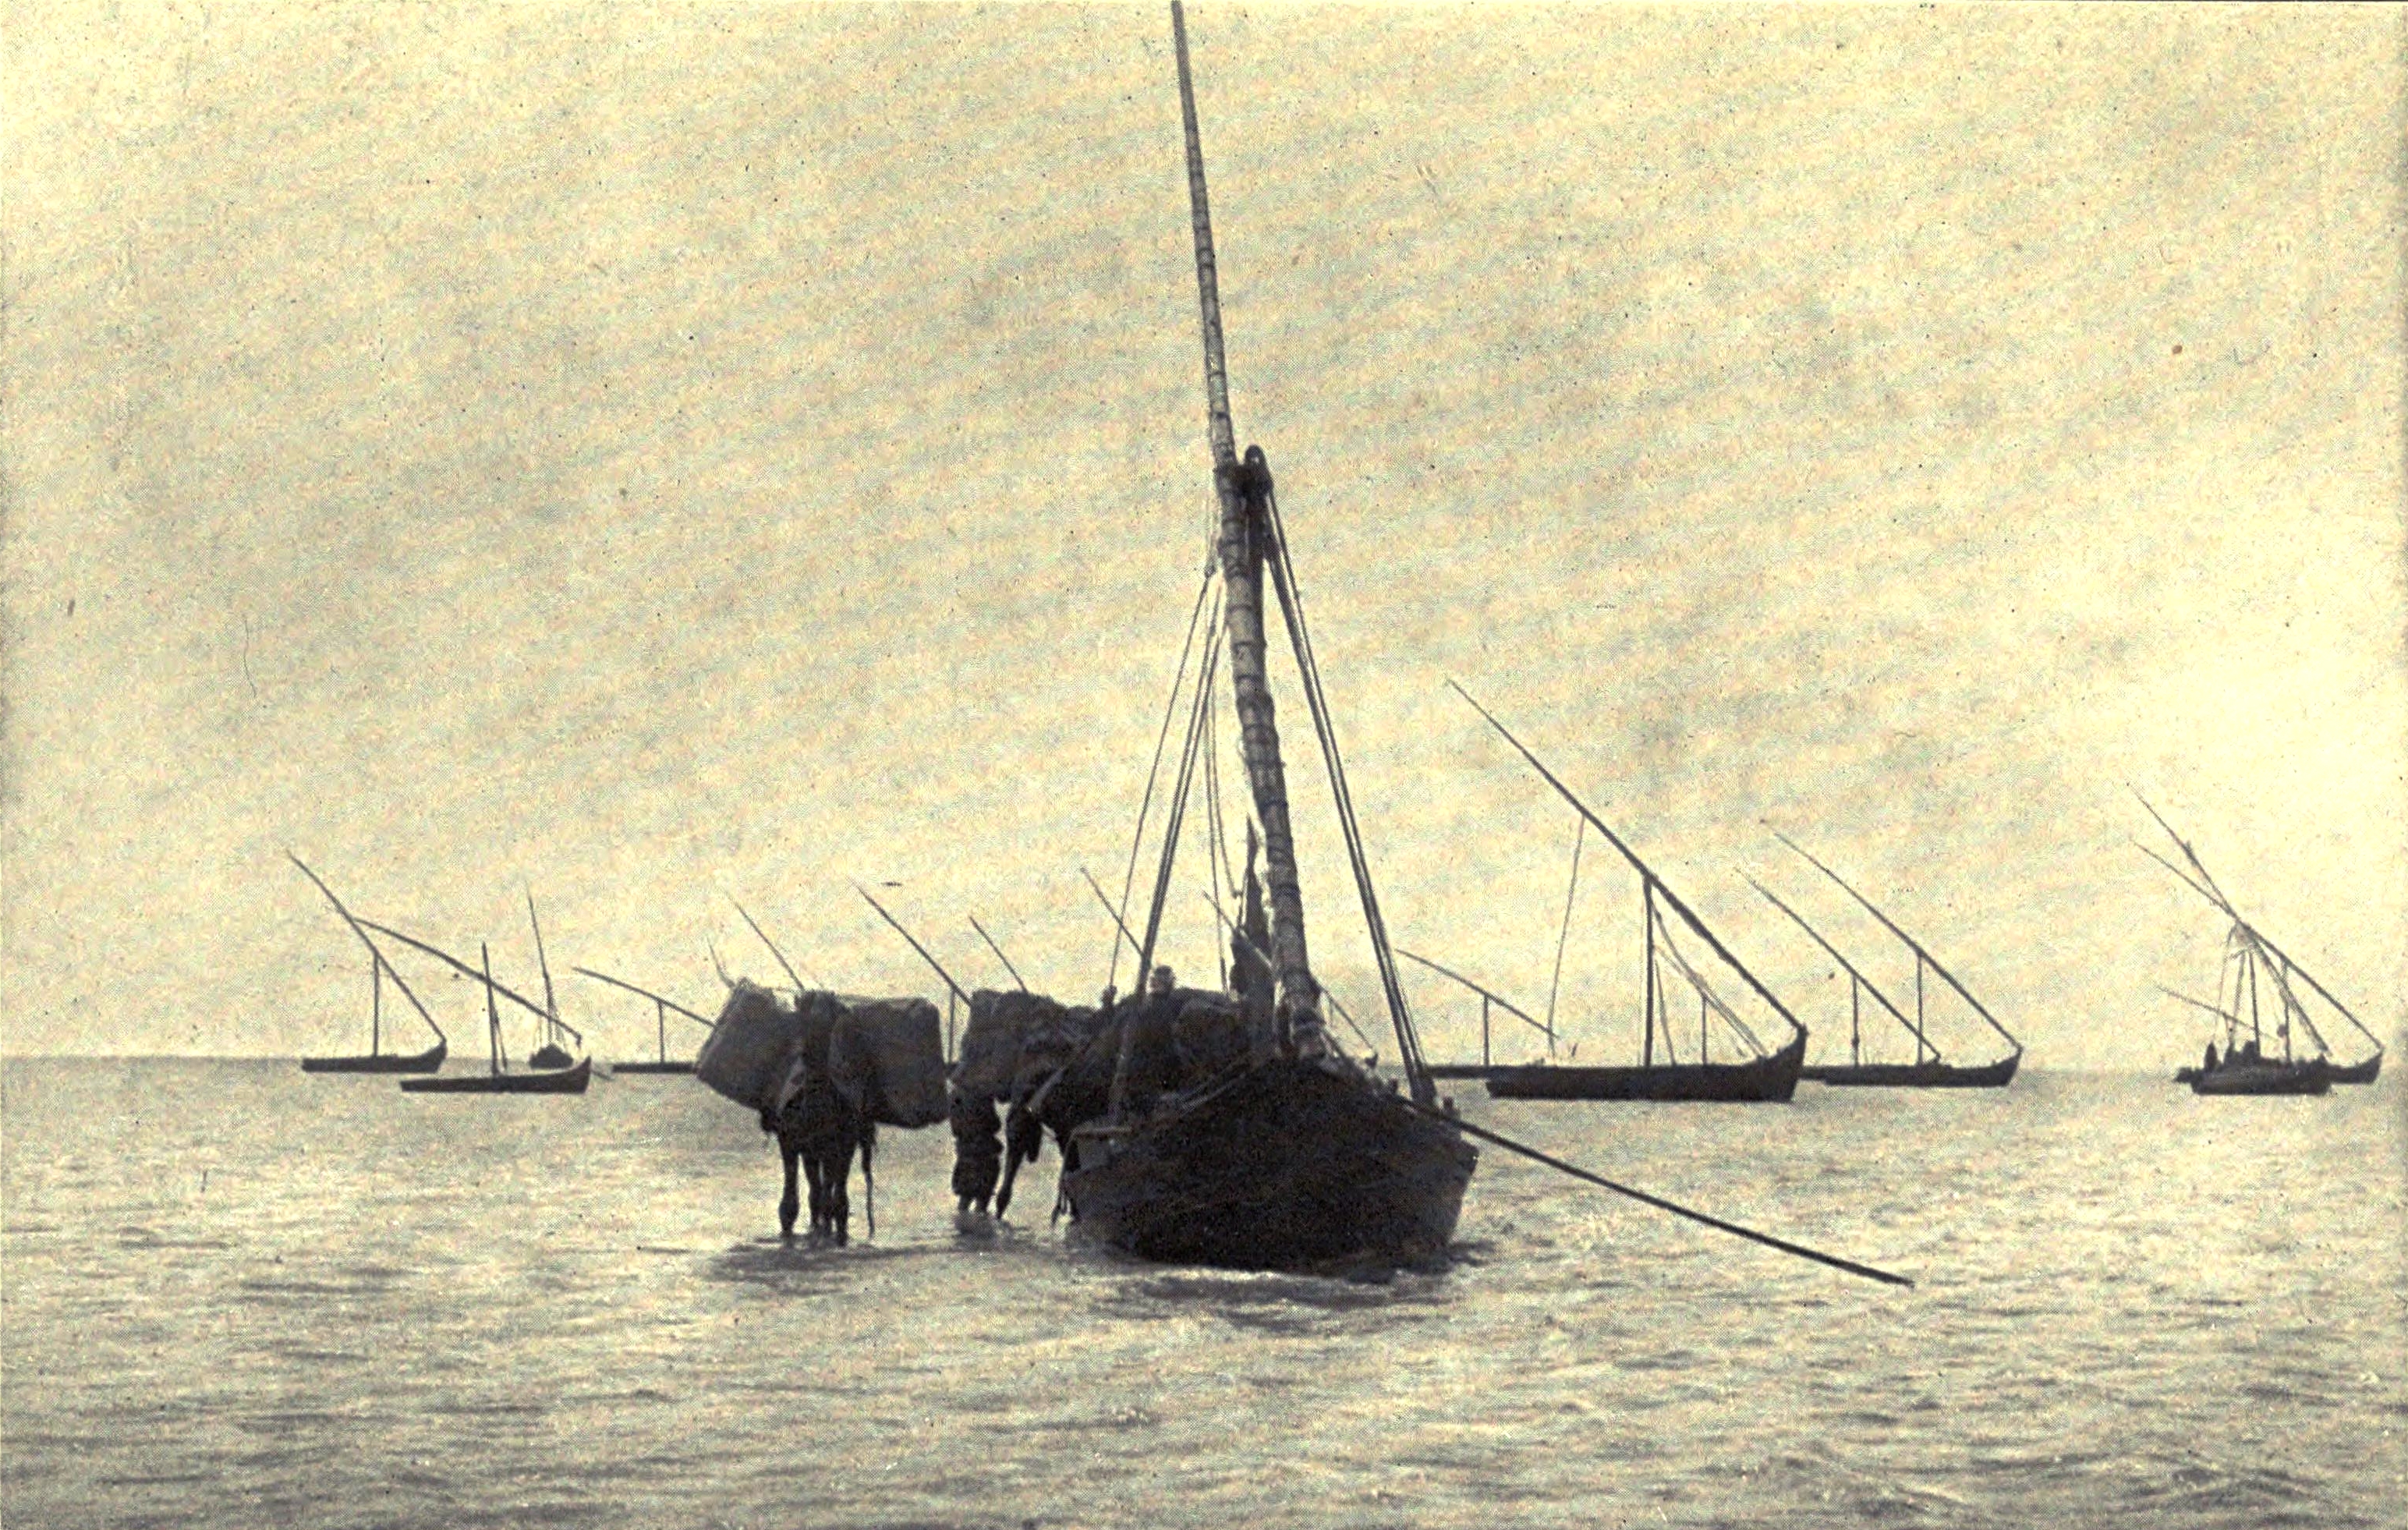 Camels Lading at Baltim. Accidents of an antiquary's life. 1910